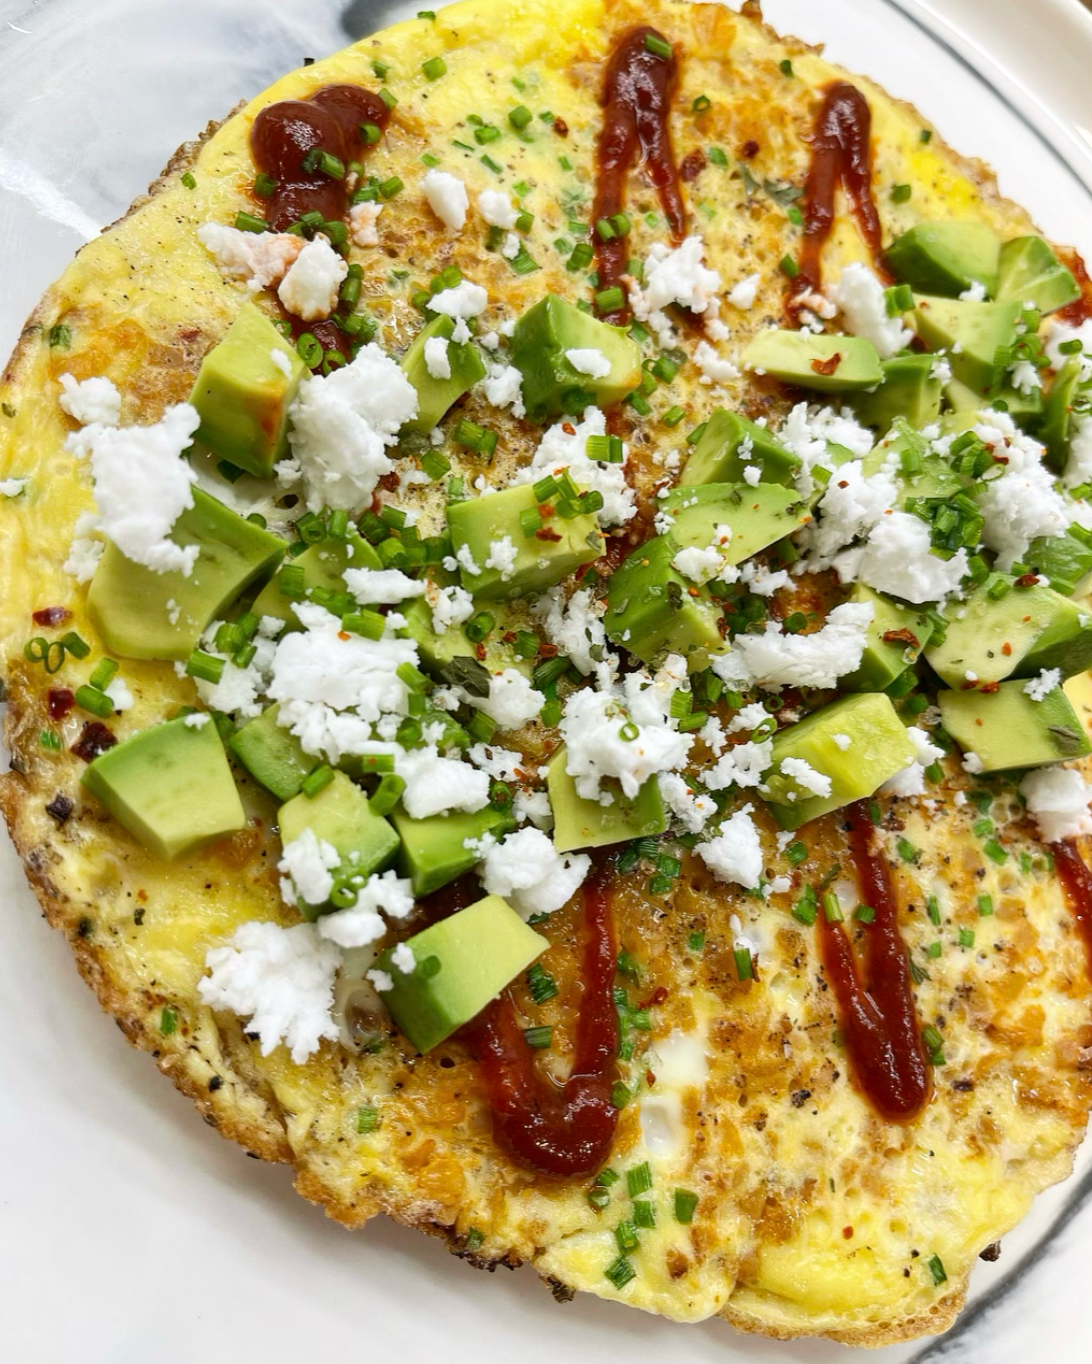 Use Your Leftovers..Make A Frittata!